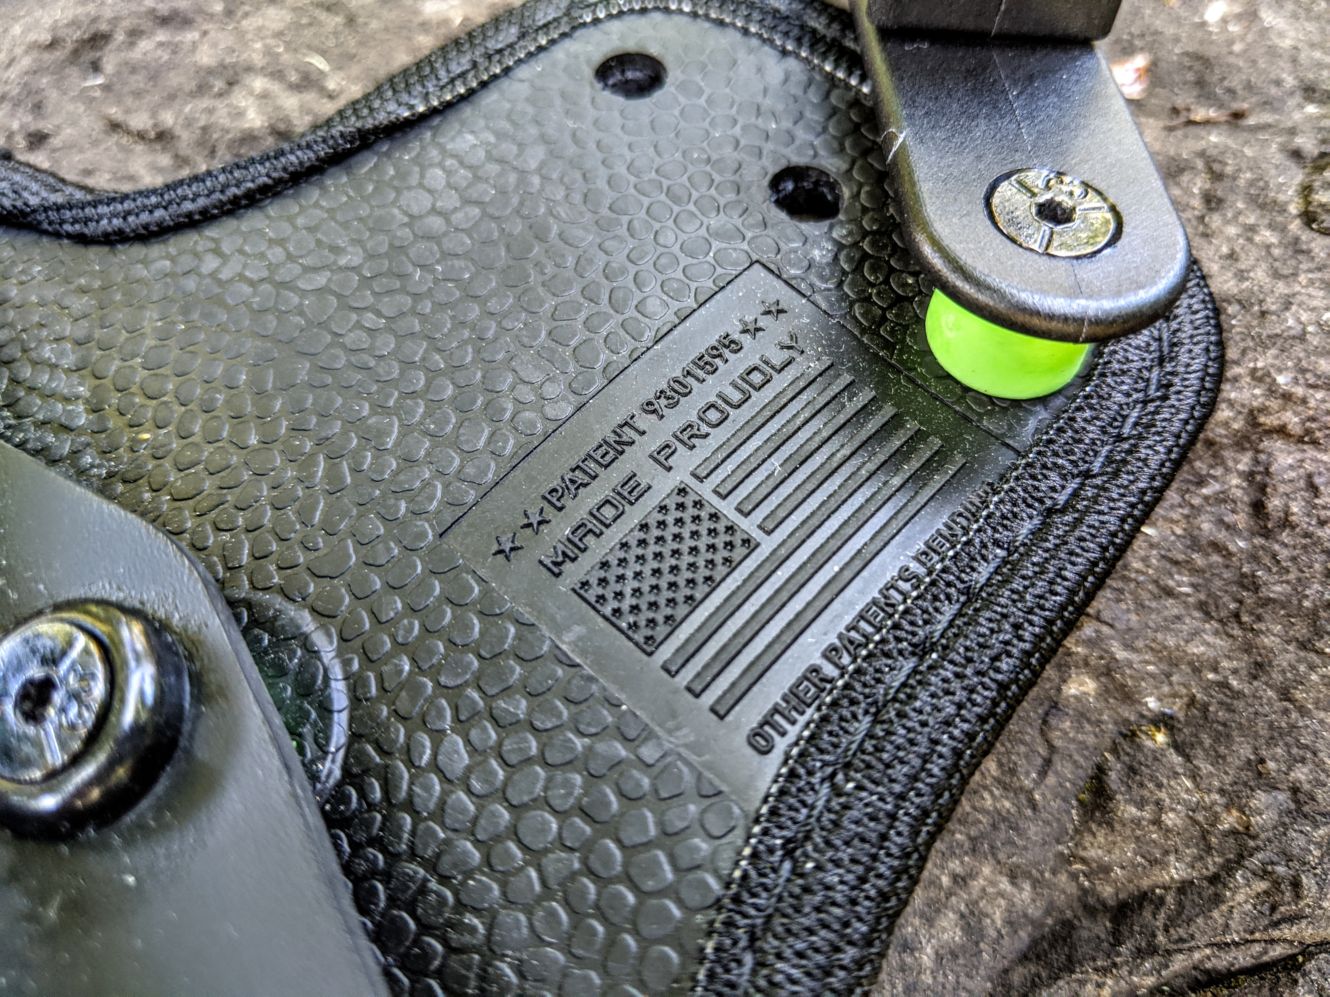 My Final Thoughts on the Alien Gear Cloak Tuck 3.0 IWB Holster